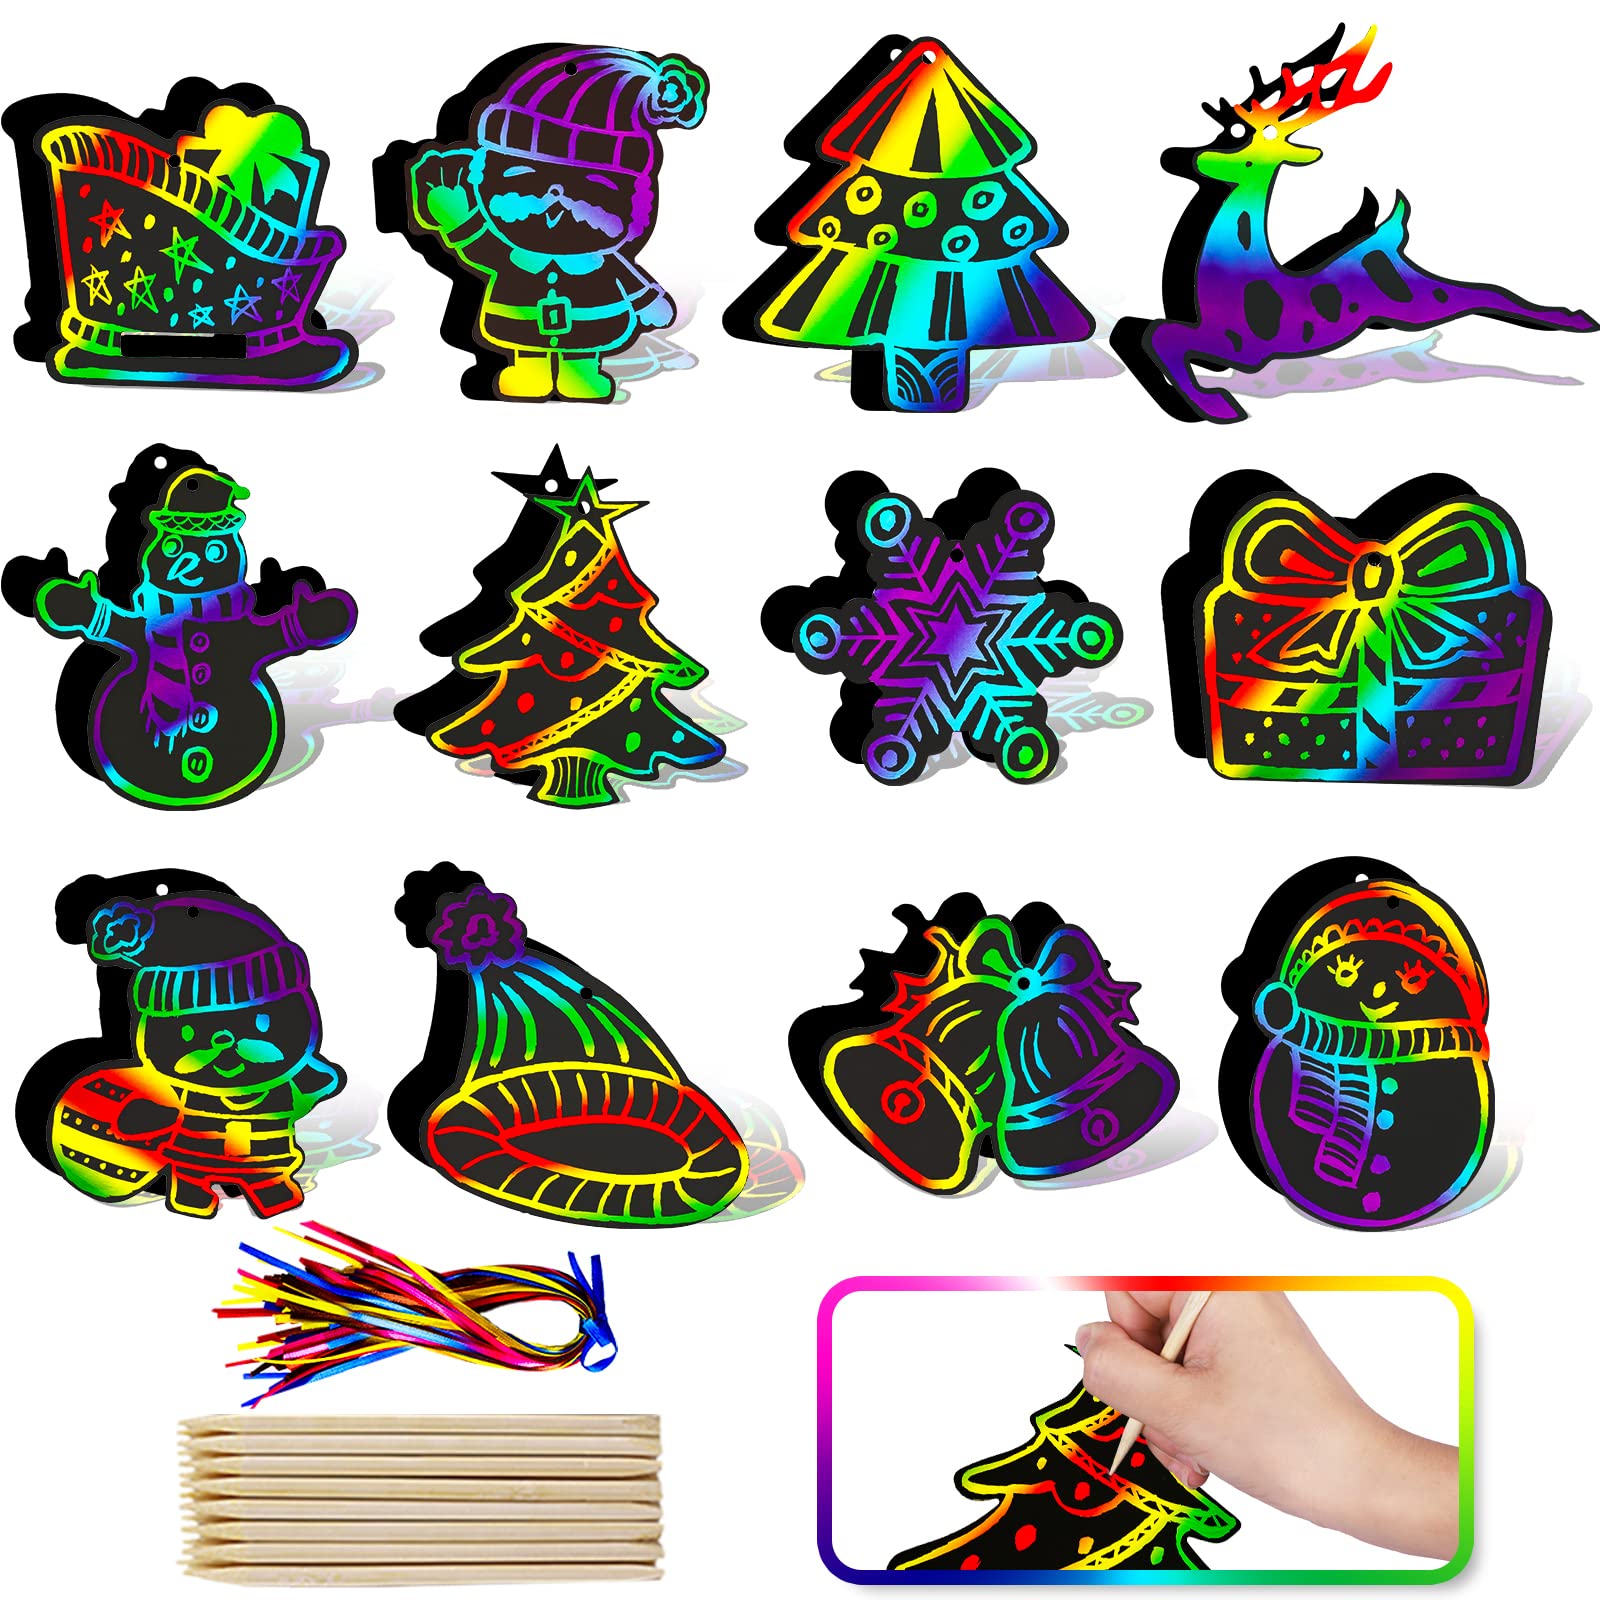 Max Fun Rainbow Color Scratch Christmas Ornaments (48 Counts) - Magic Scratch Off Cards Paper Hanging Art Craft Supplies Educational Toys Kit with 24PCS Drawing Sticks & Cords for Kids Party Favors